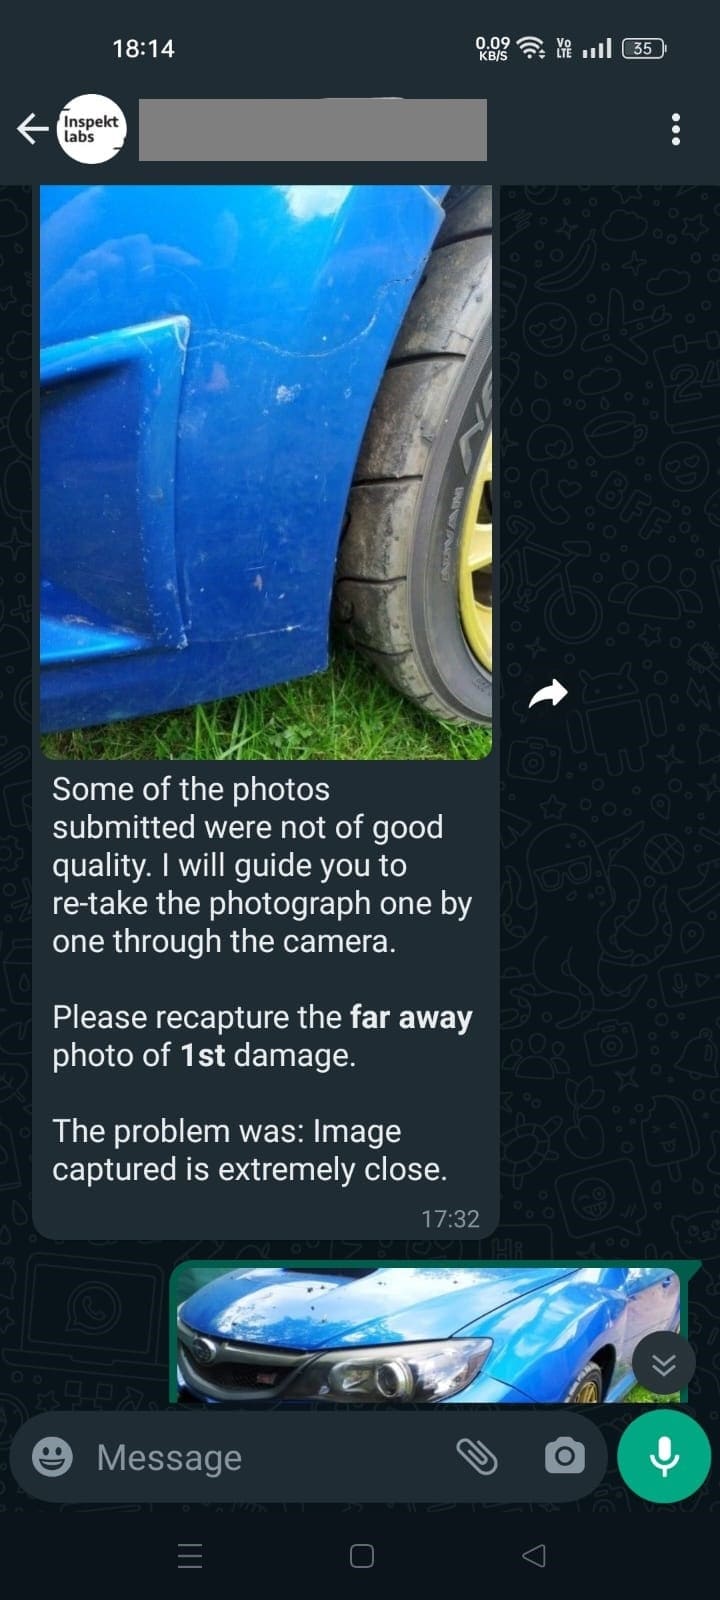 Real time Feedback of Image Quality by Inspektbot